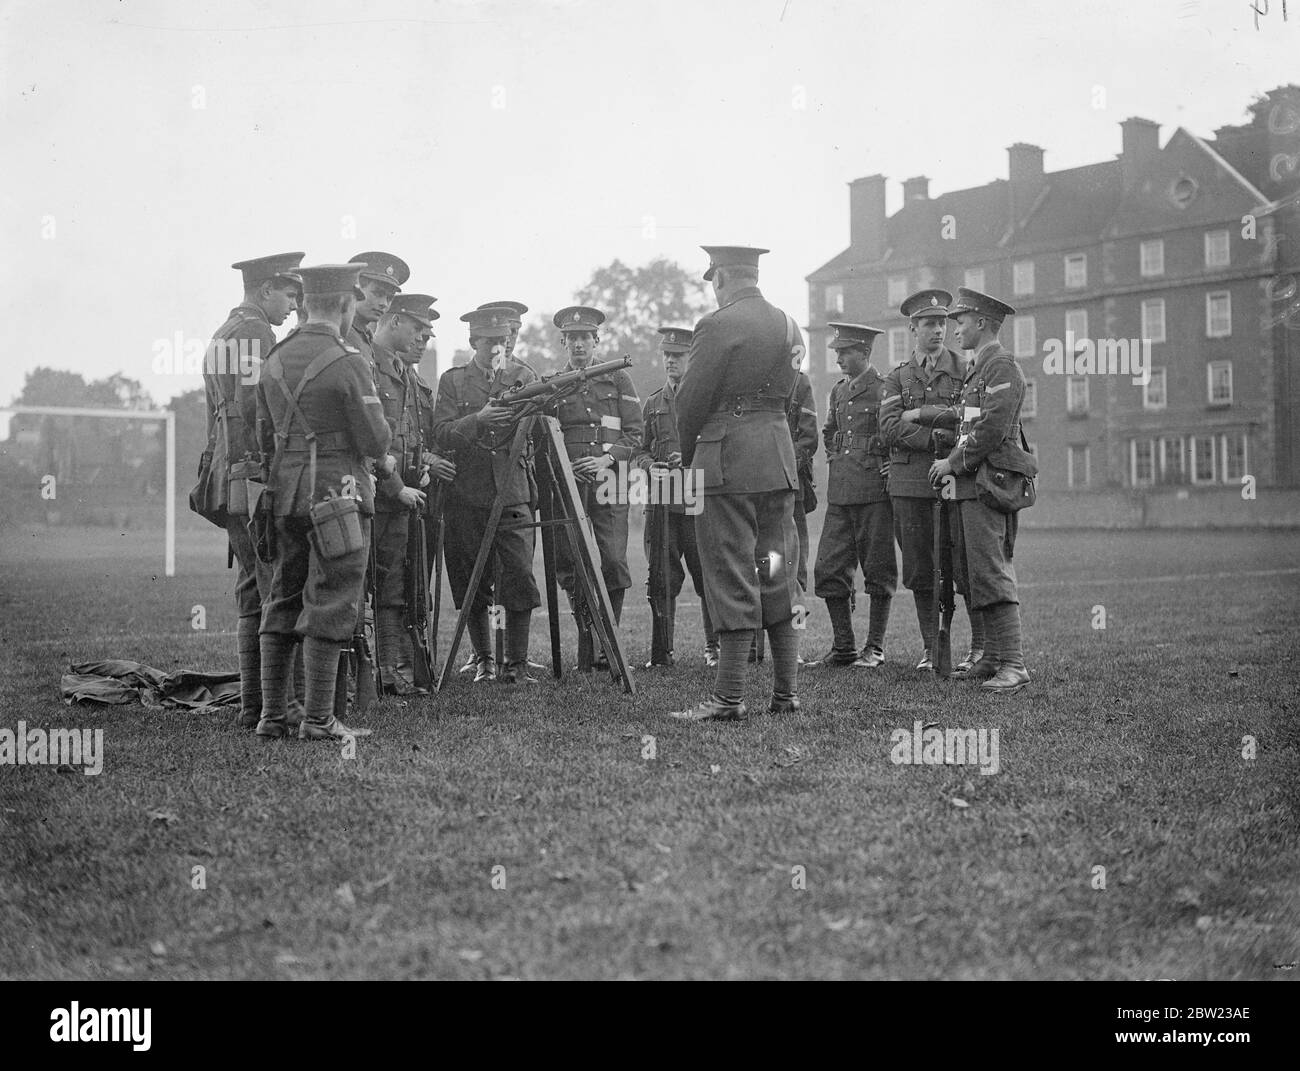 Musketry instruction for cadets of the Eton College officers training corp in the college grounds. The rifle is placed on a tripod to make it more convenient for demonstration purposes. 14 October 1937. Stock Photo